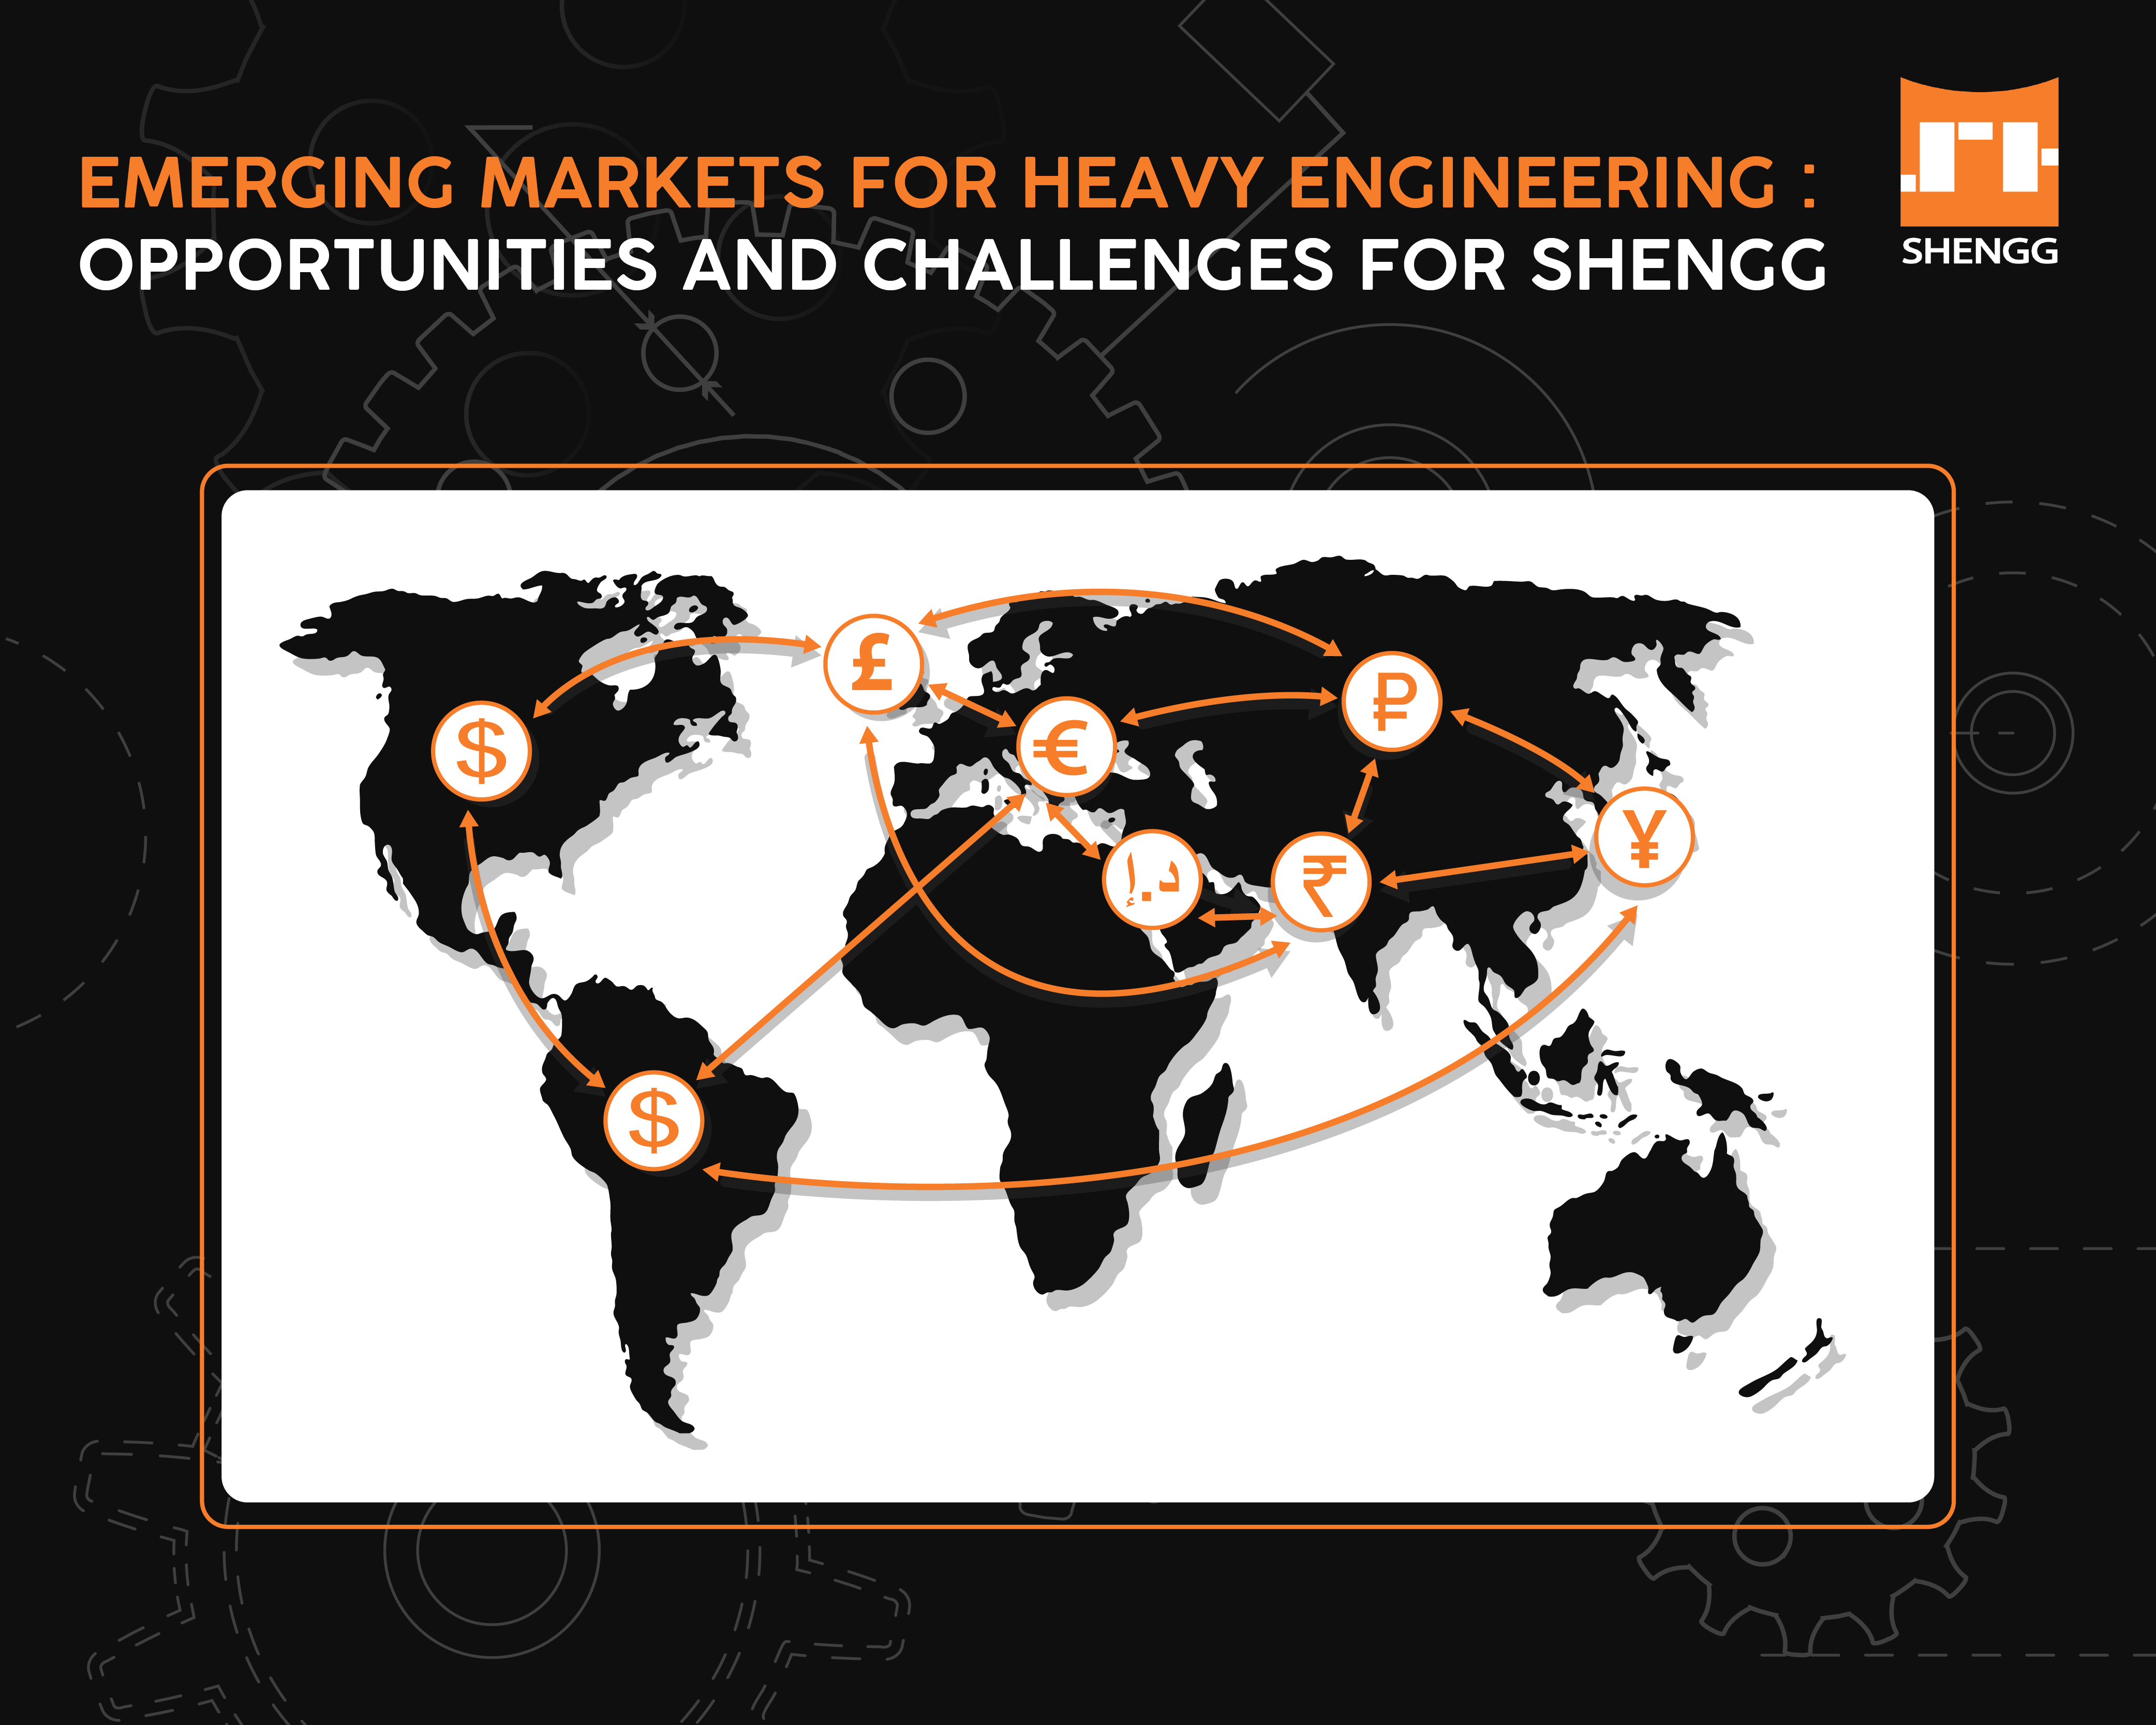 Emerging Markets for Heavy Engineering: Opportunities and Challenges for SHENGG